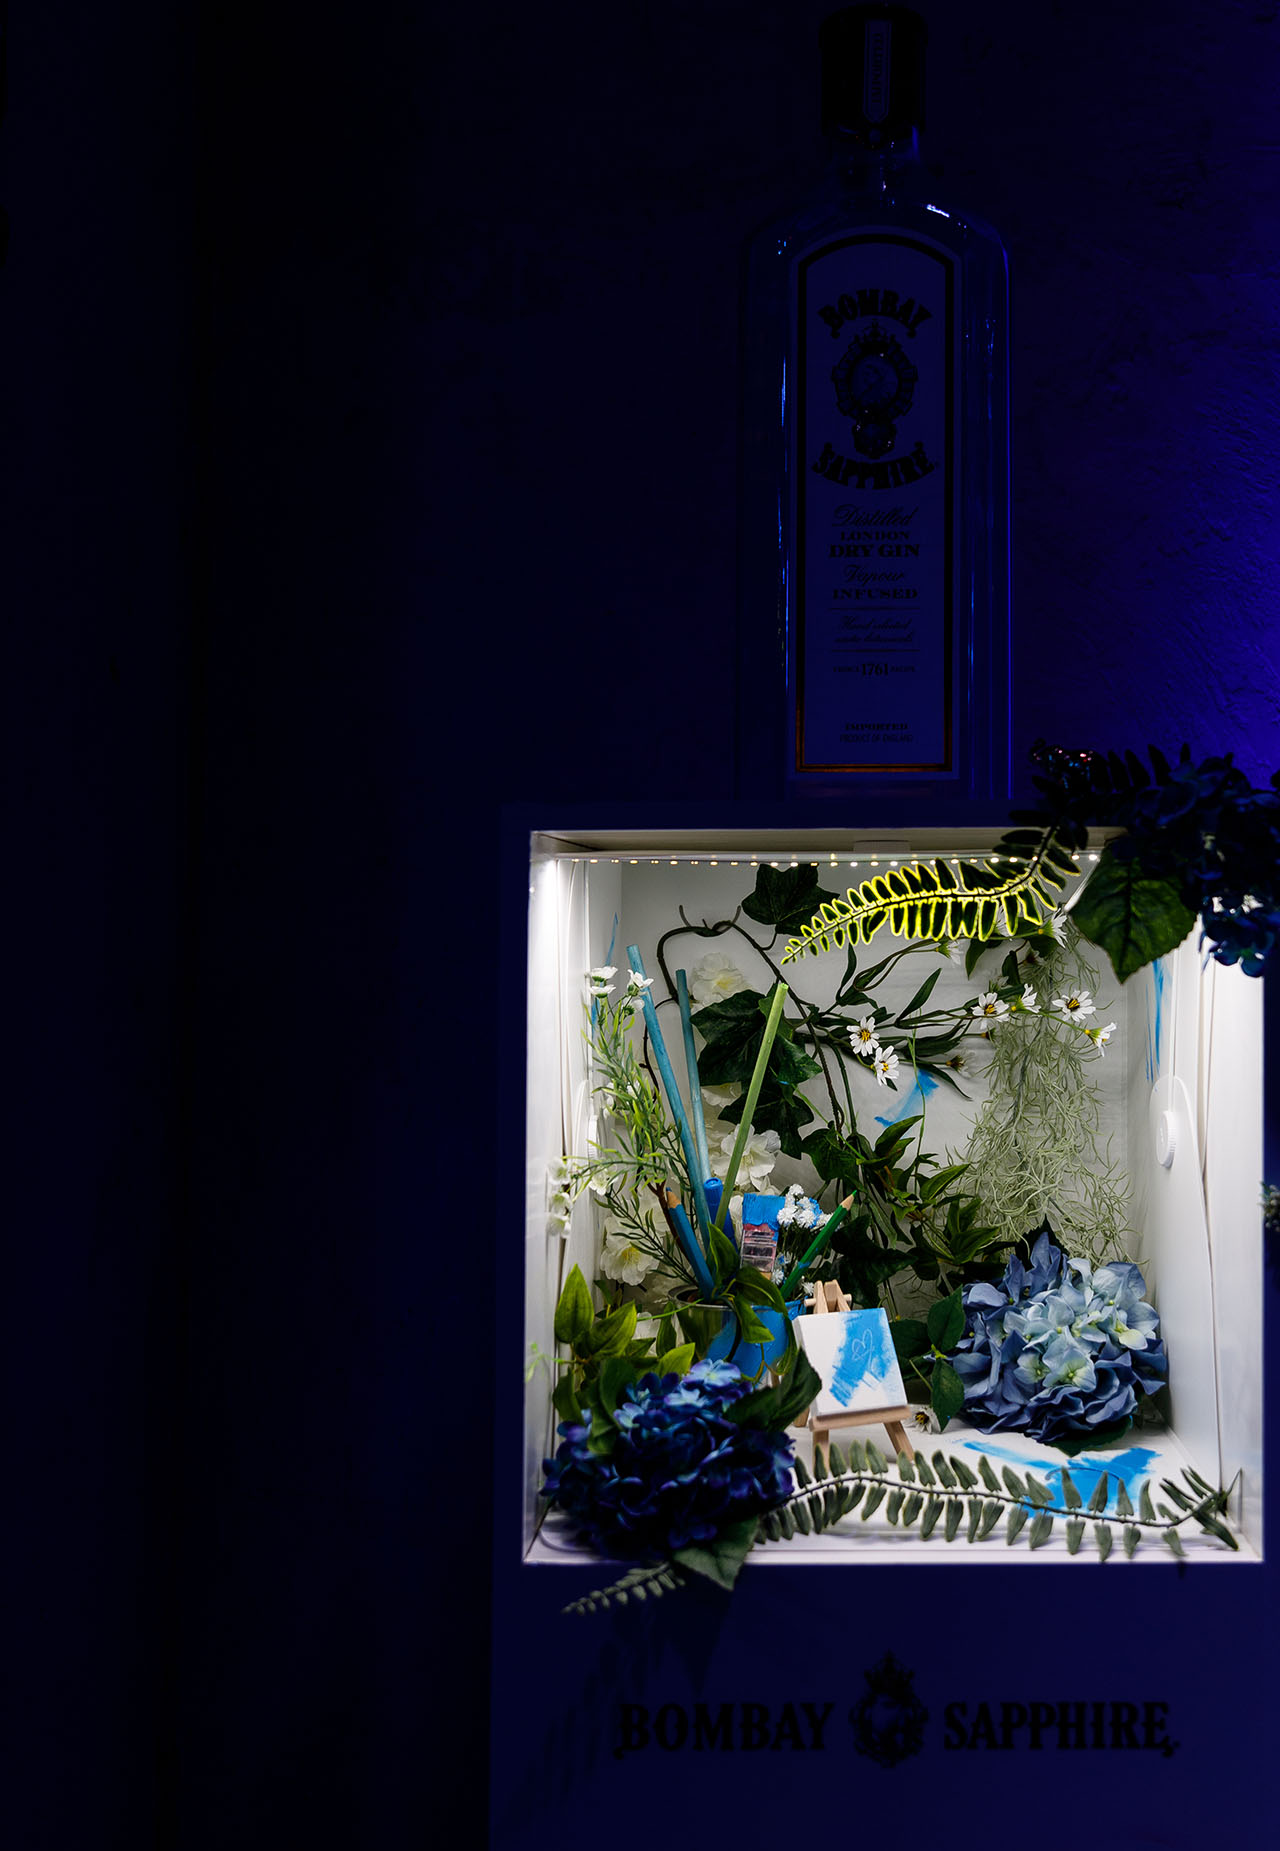 Miniature photo-booth for "White Canvas" cocktails. Photo by Spyros Chamalis © Yatzer 2019.